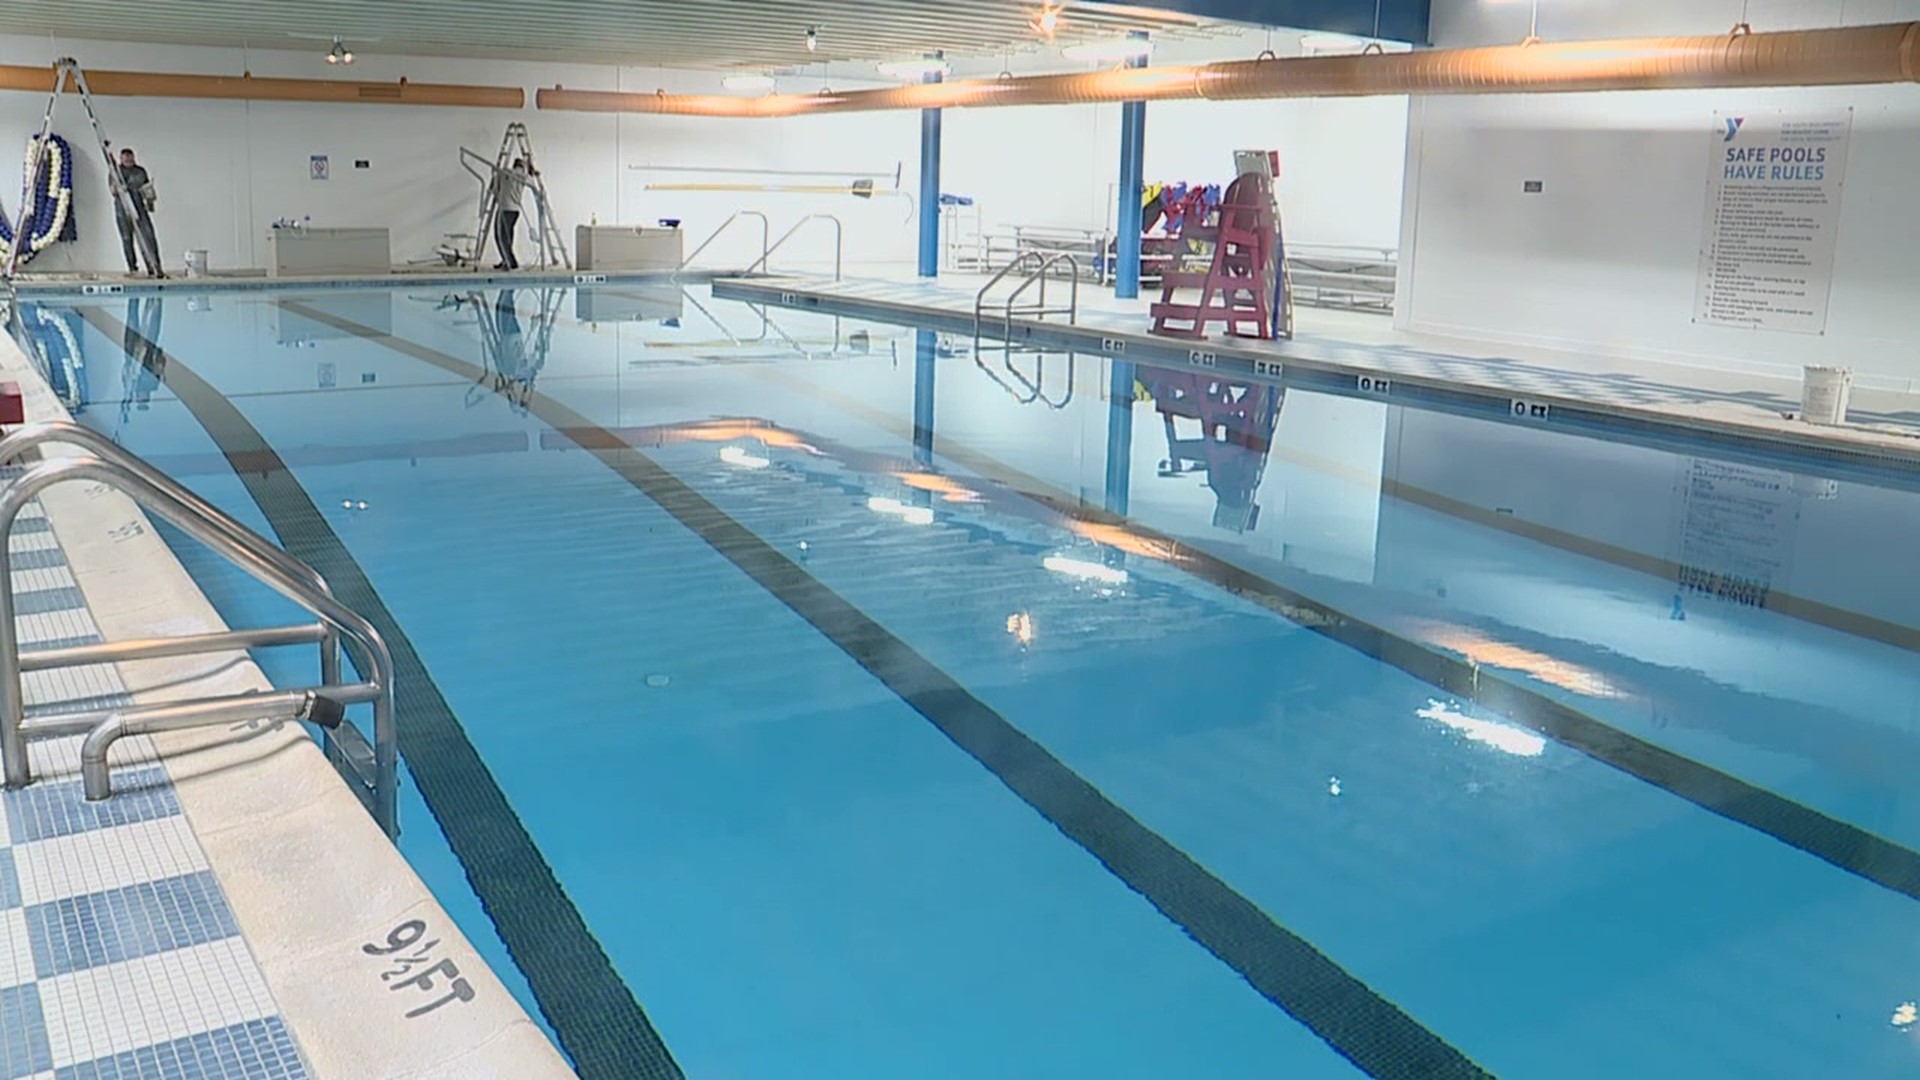 The pool at the Lock Haven YMCA is set to reopen for the first time in three years.